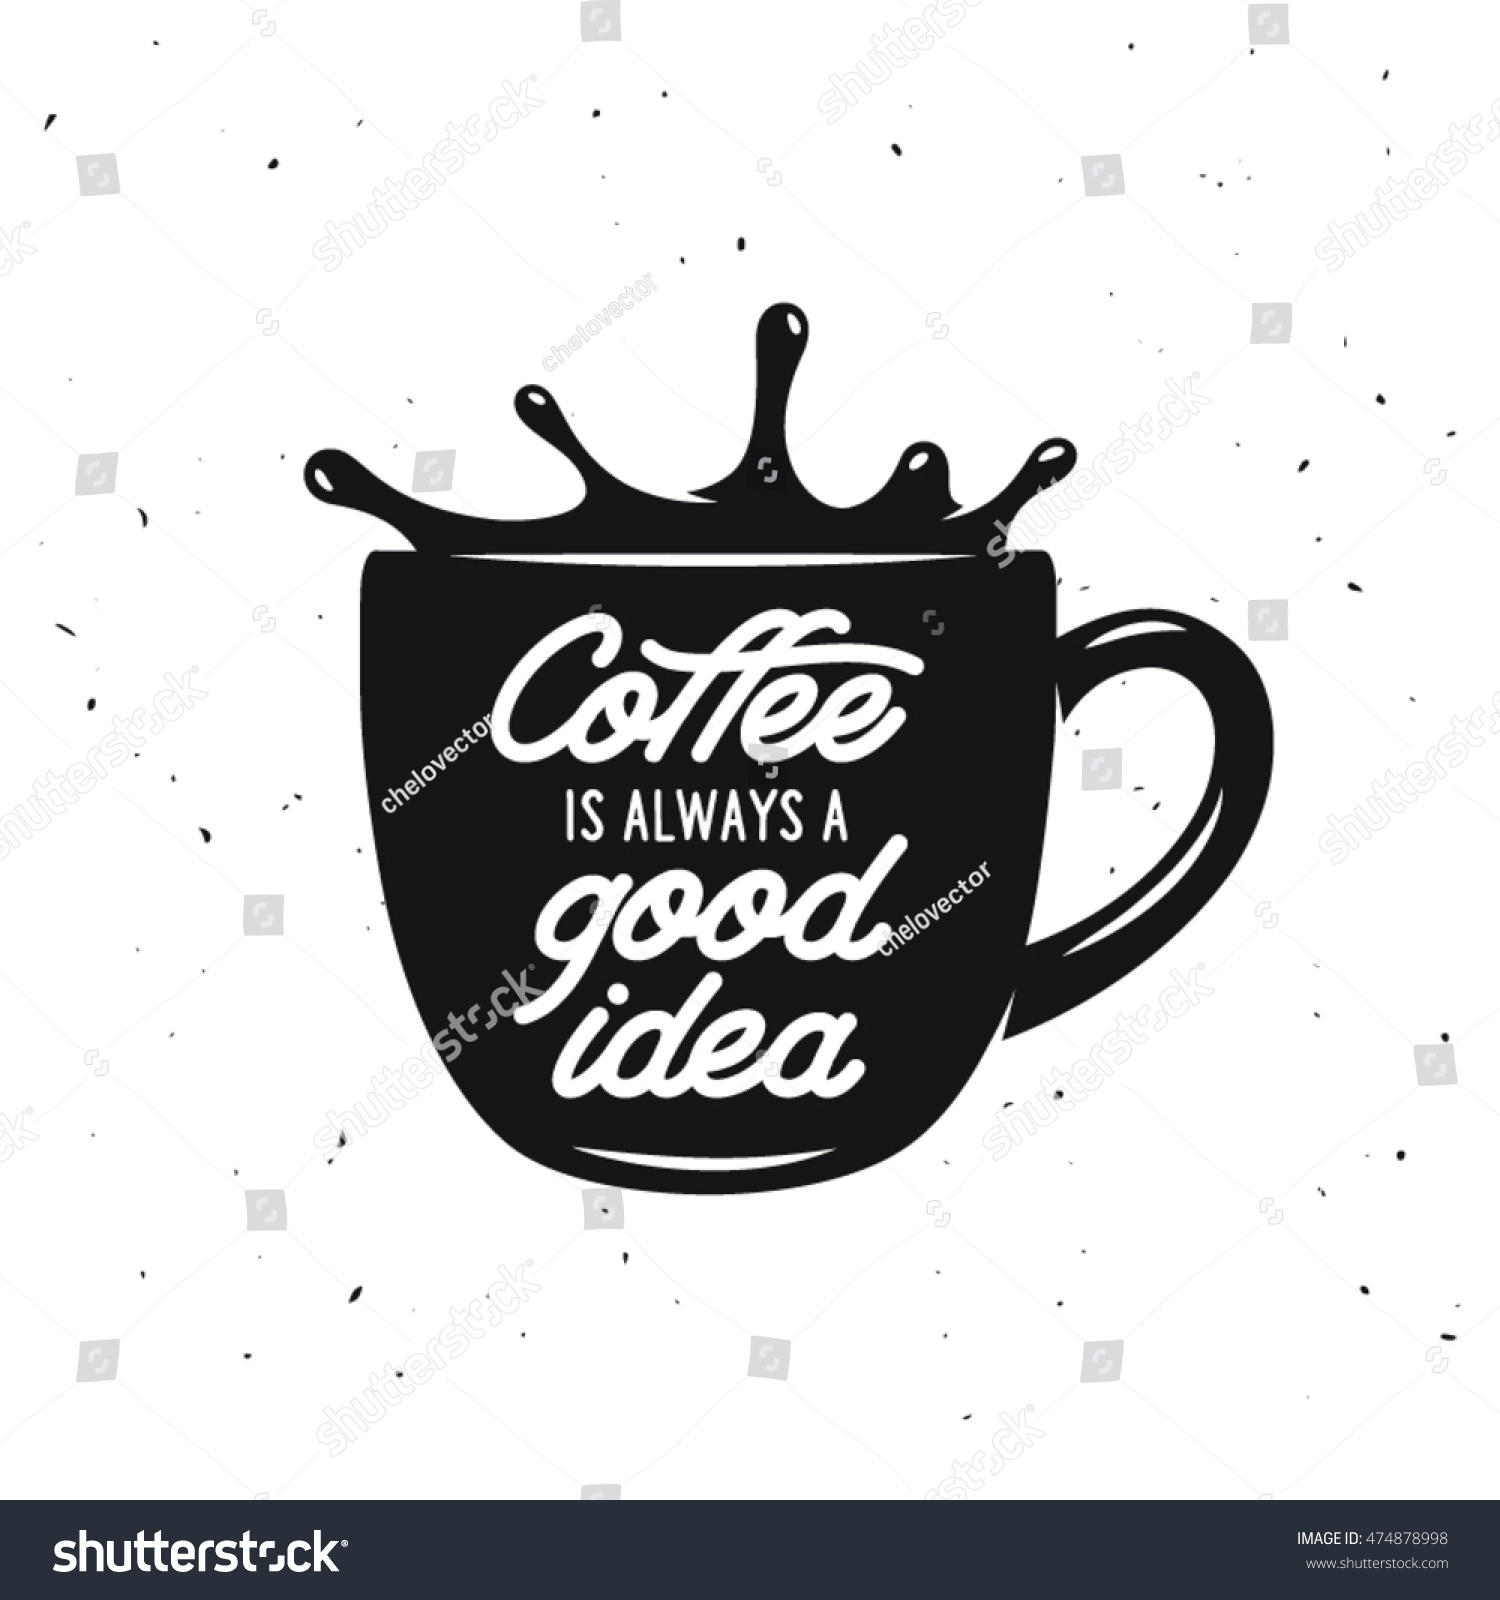 Download Coffee Cup Vintage Vector Illustration Quote Stock Vector 474878998 - Shutterstock